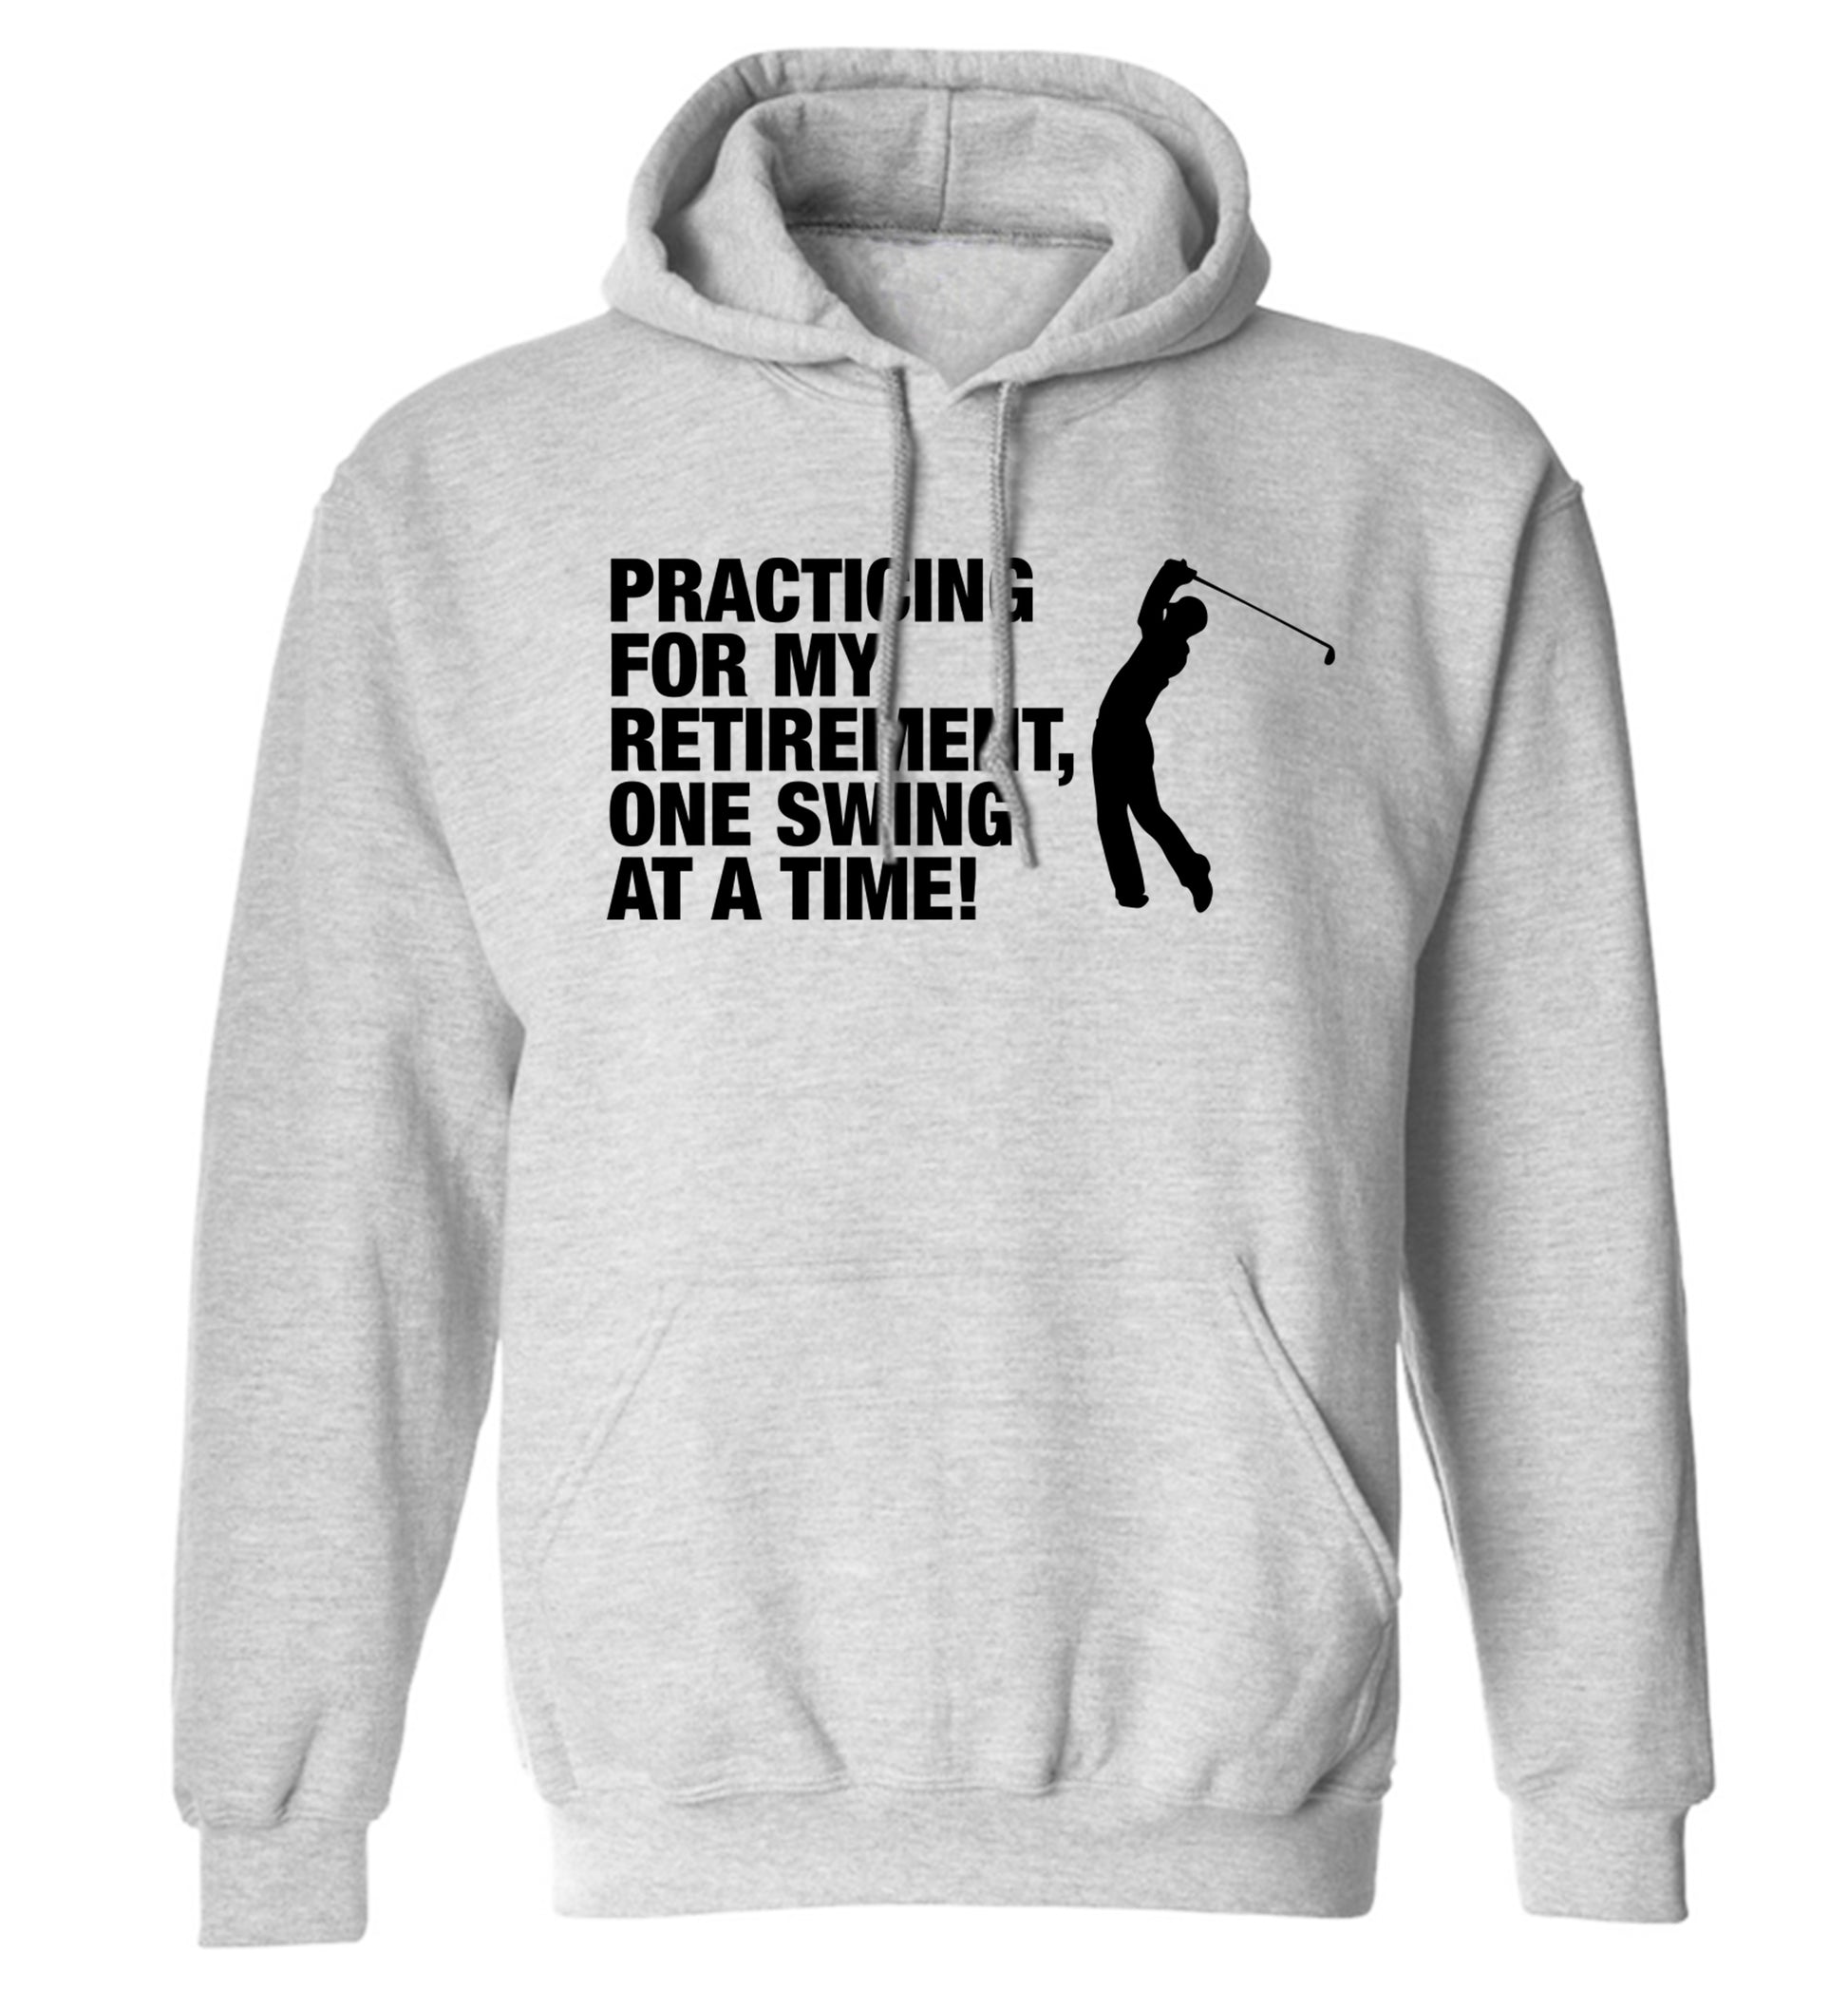 Practicing for my retirement one swing at a time adults unisex grey hoodie 2XL